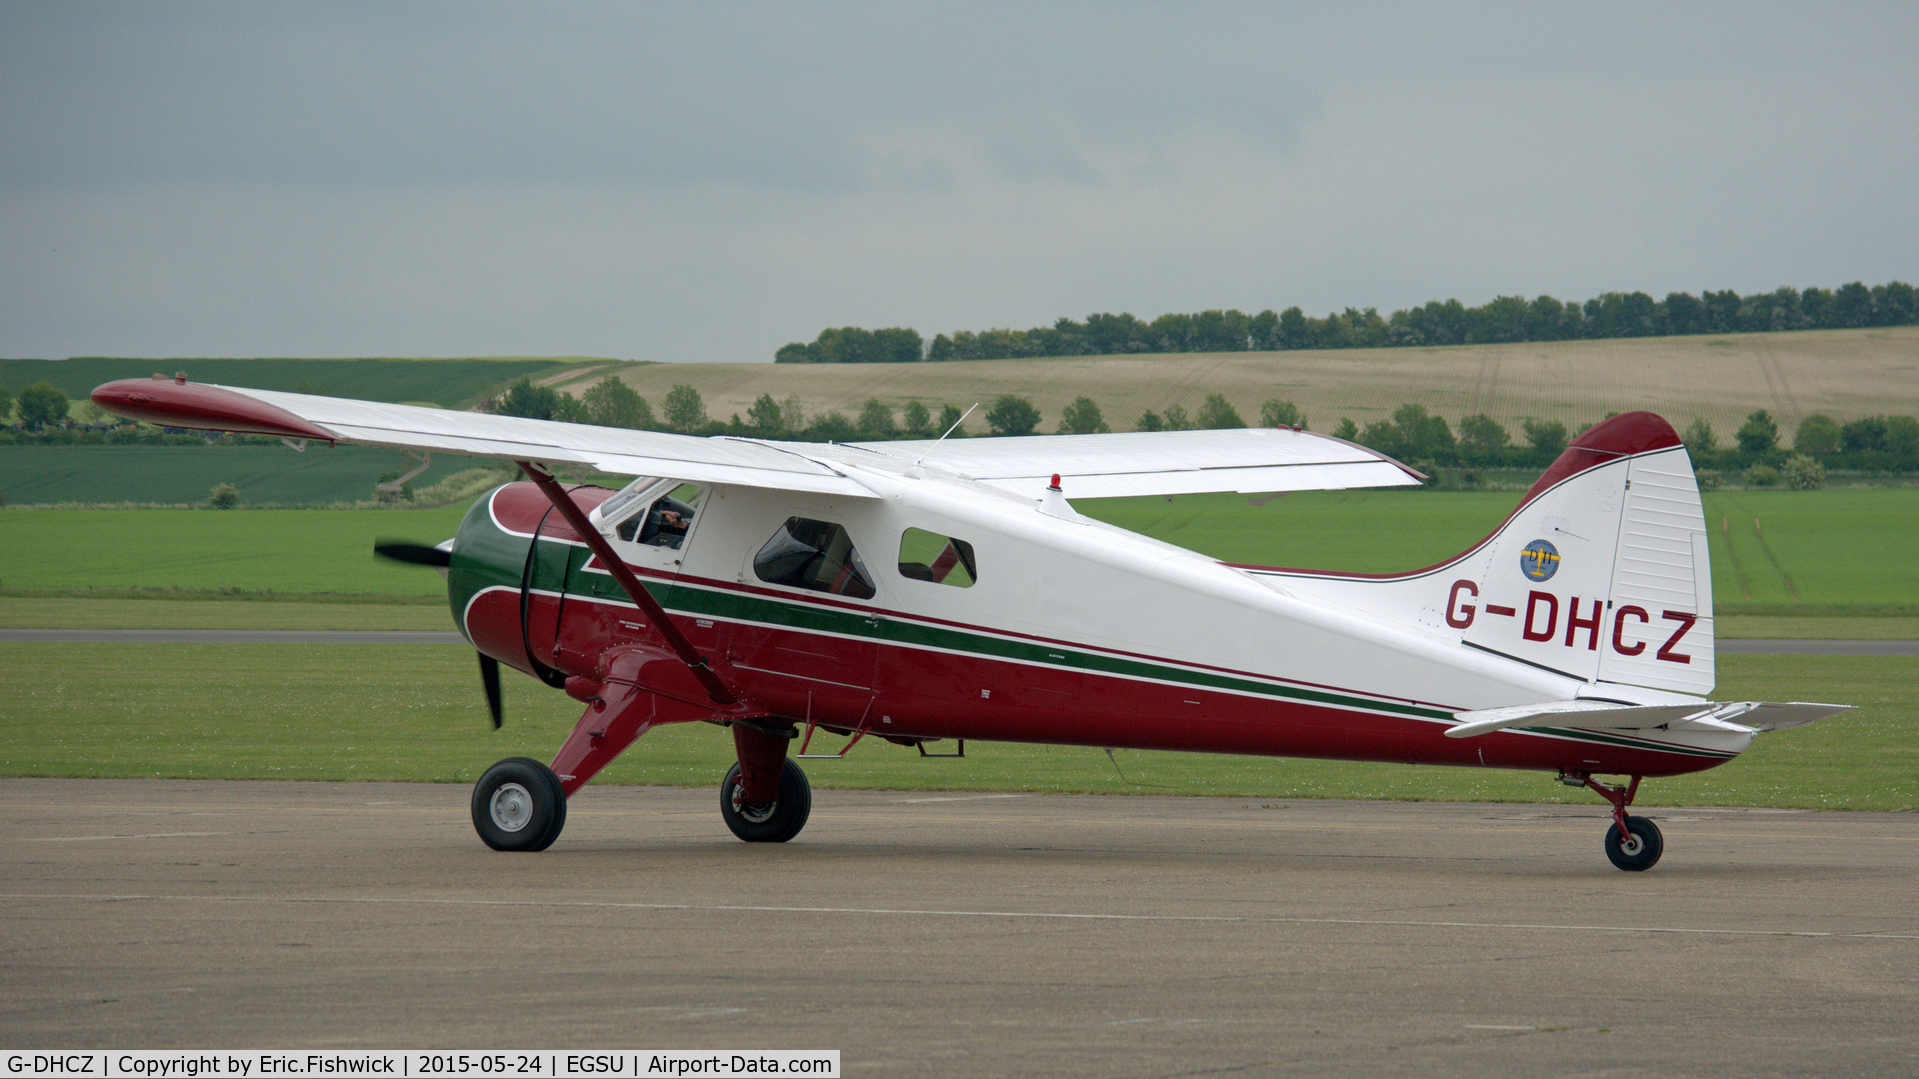 G-DHCZ, 1960 De Havilland Canada DHC-2 Beaver AL.1 C/N 1442, 1. The Canadian Beaver preparing to display at The IWM VE Day Anniversary Air Show, May 2015